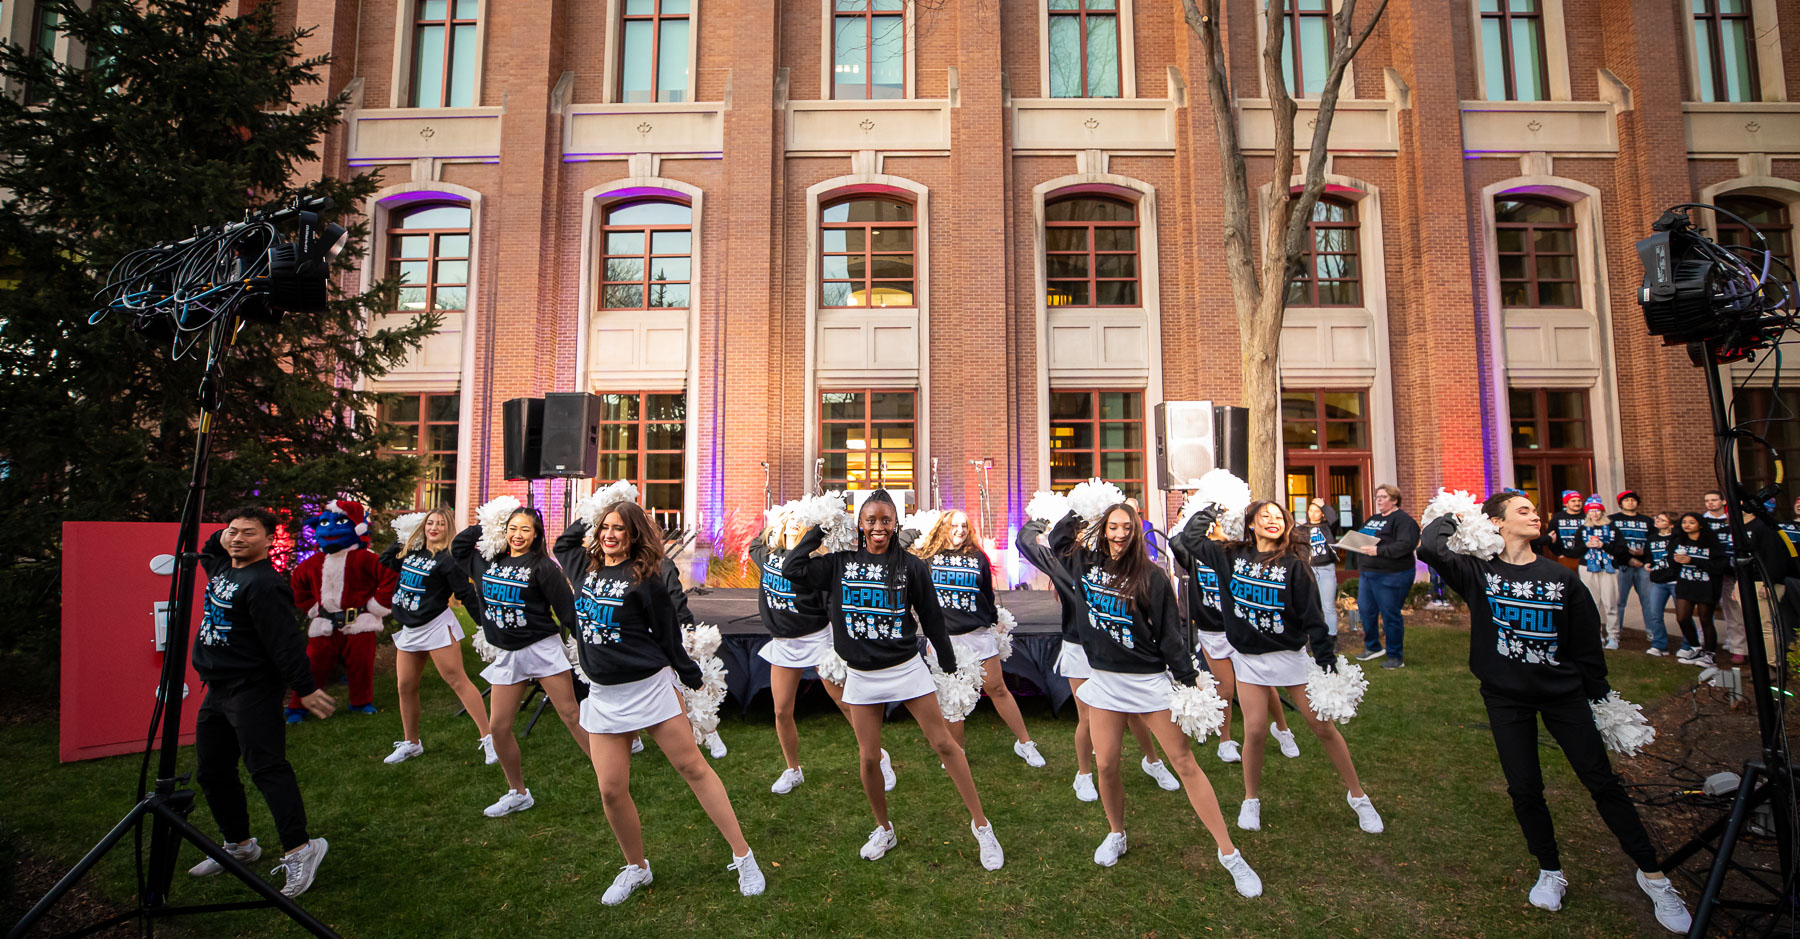 DePaul's dance squad entertained guests with a holiday-themed routine. (Photo by Jeff Carrion / DePaul University) 